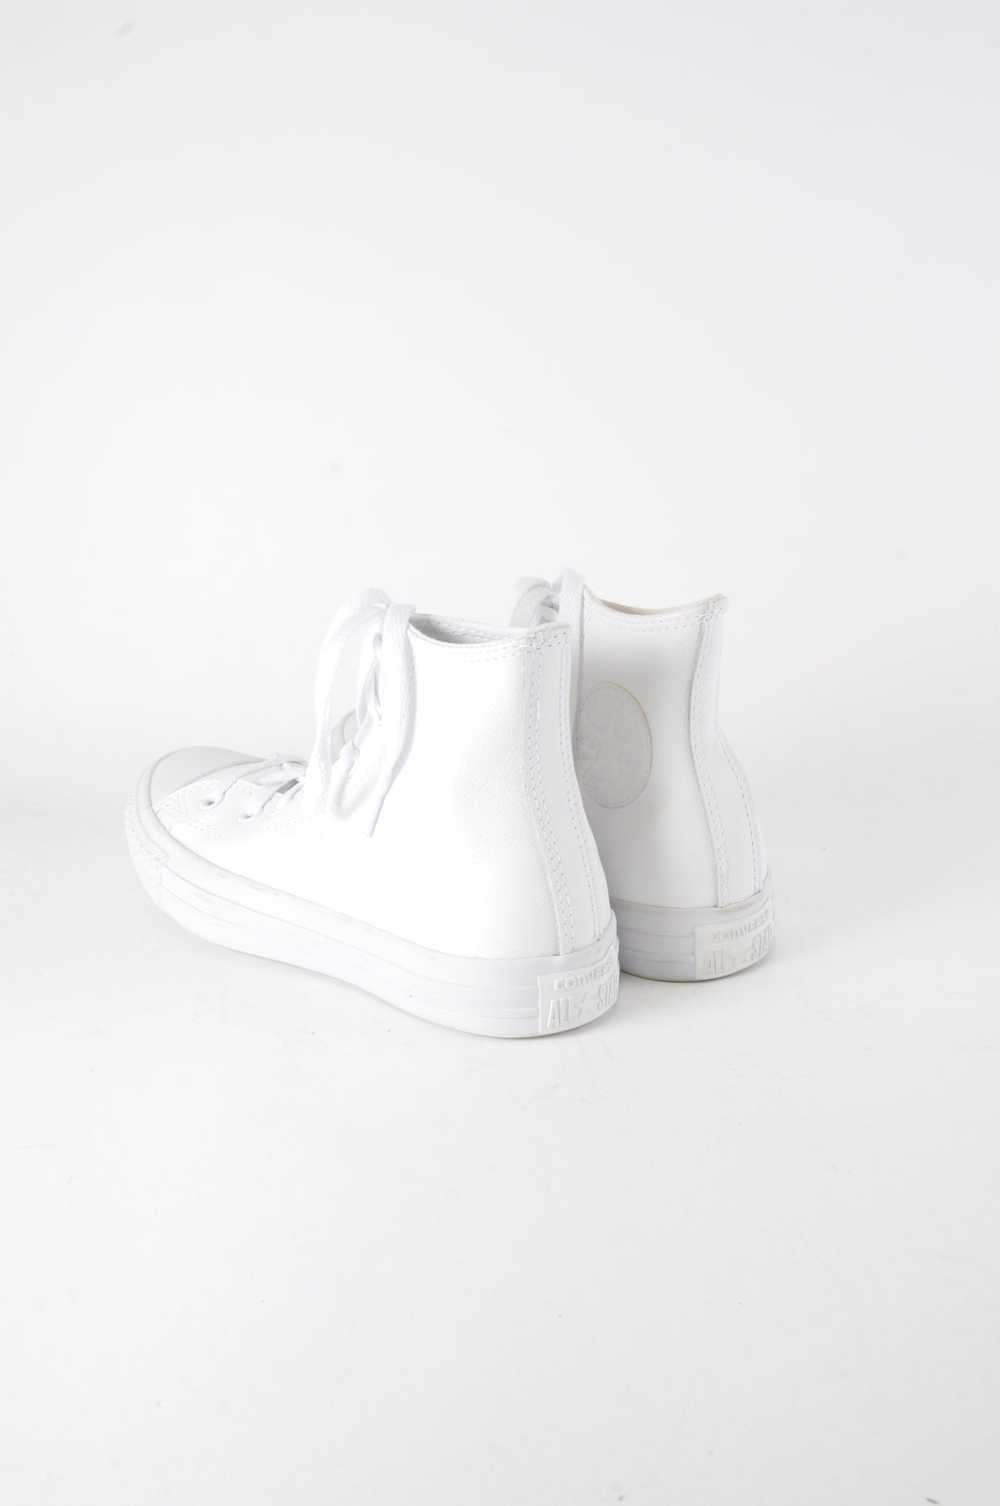 White Leather Hightop Converse - New But Imperfect - image 3